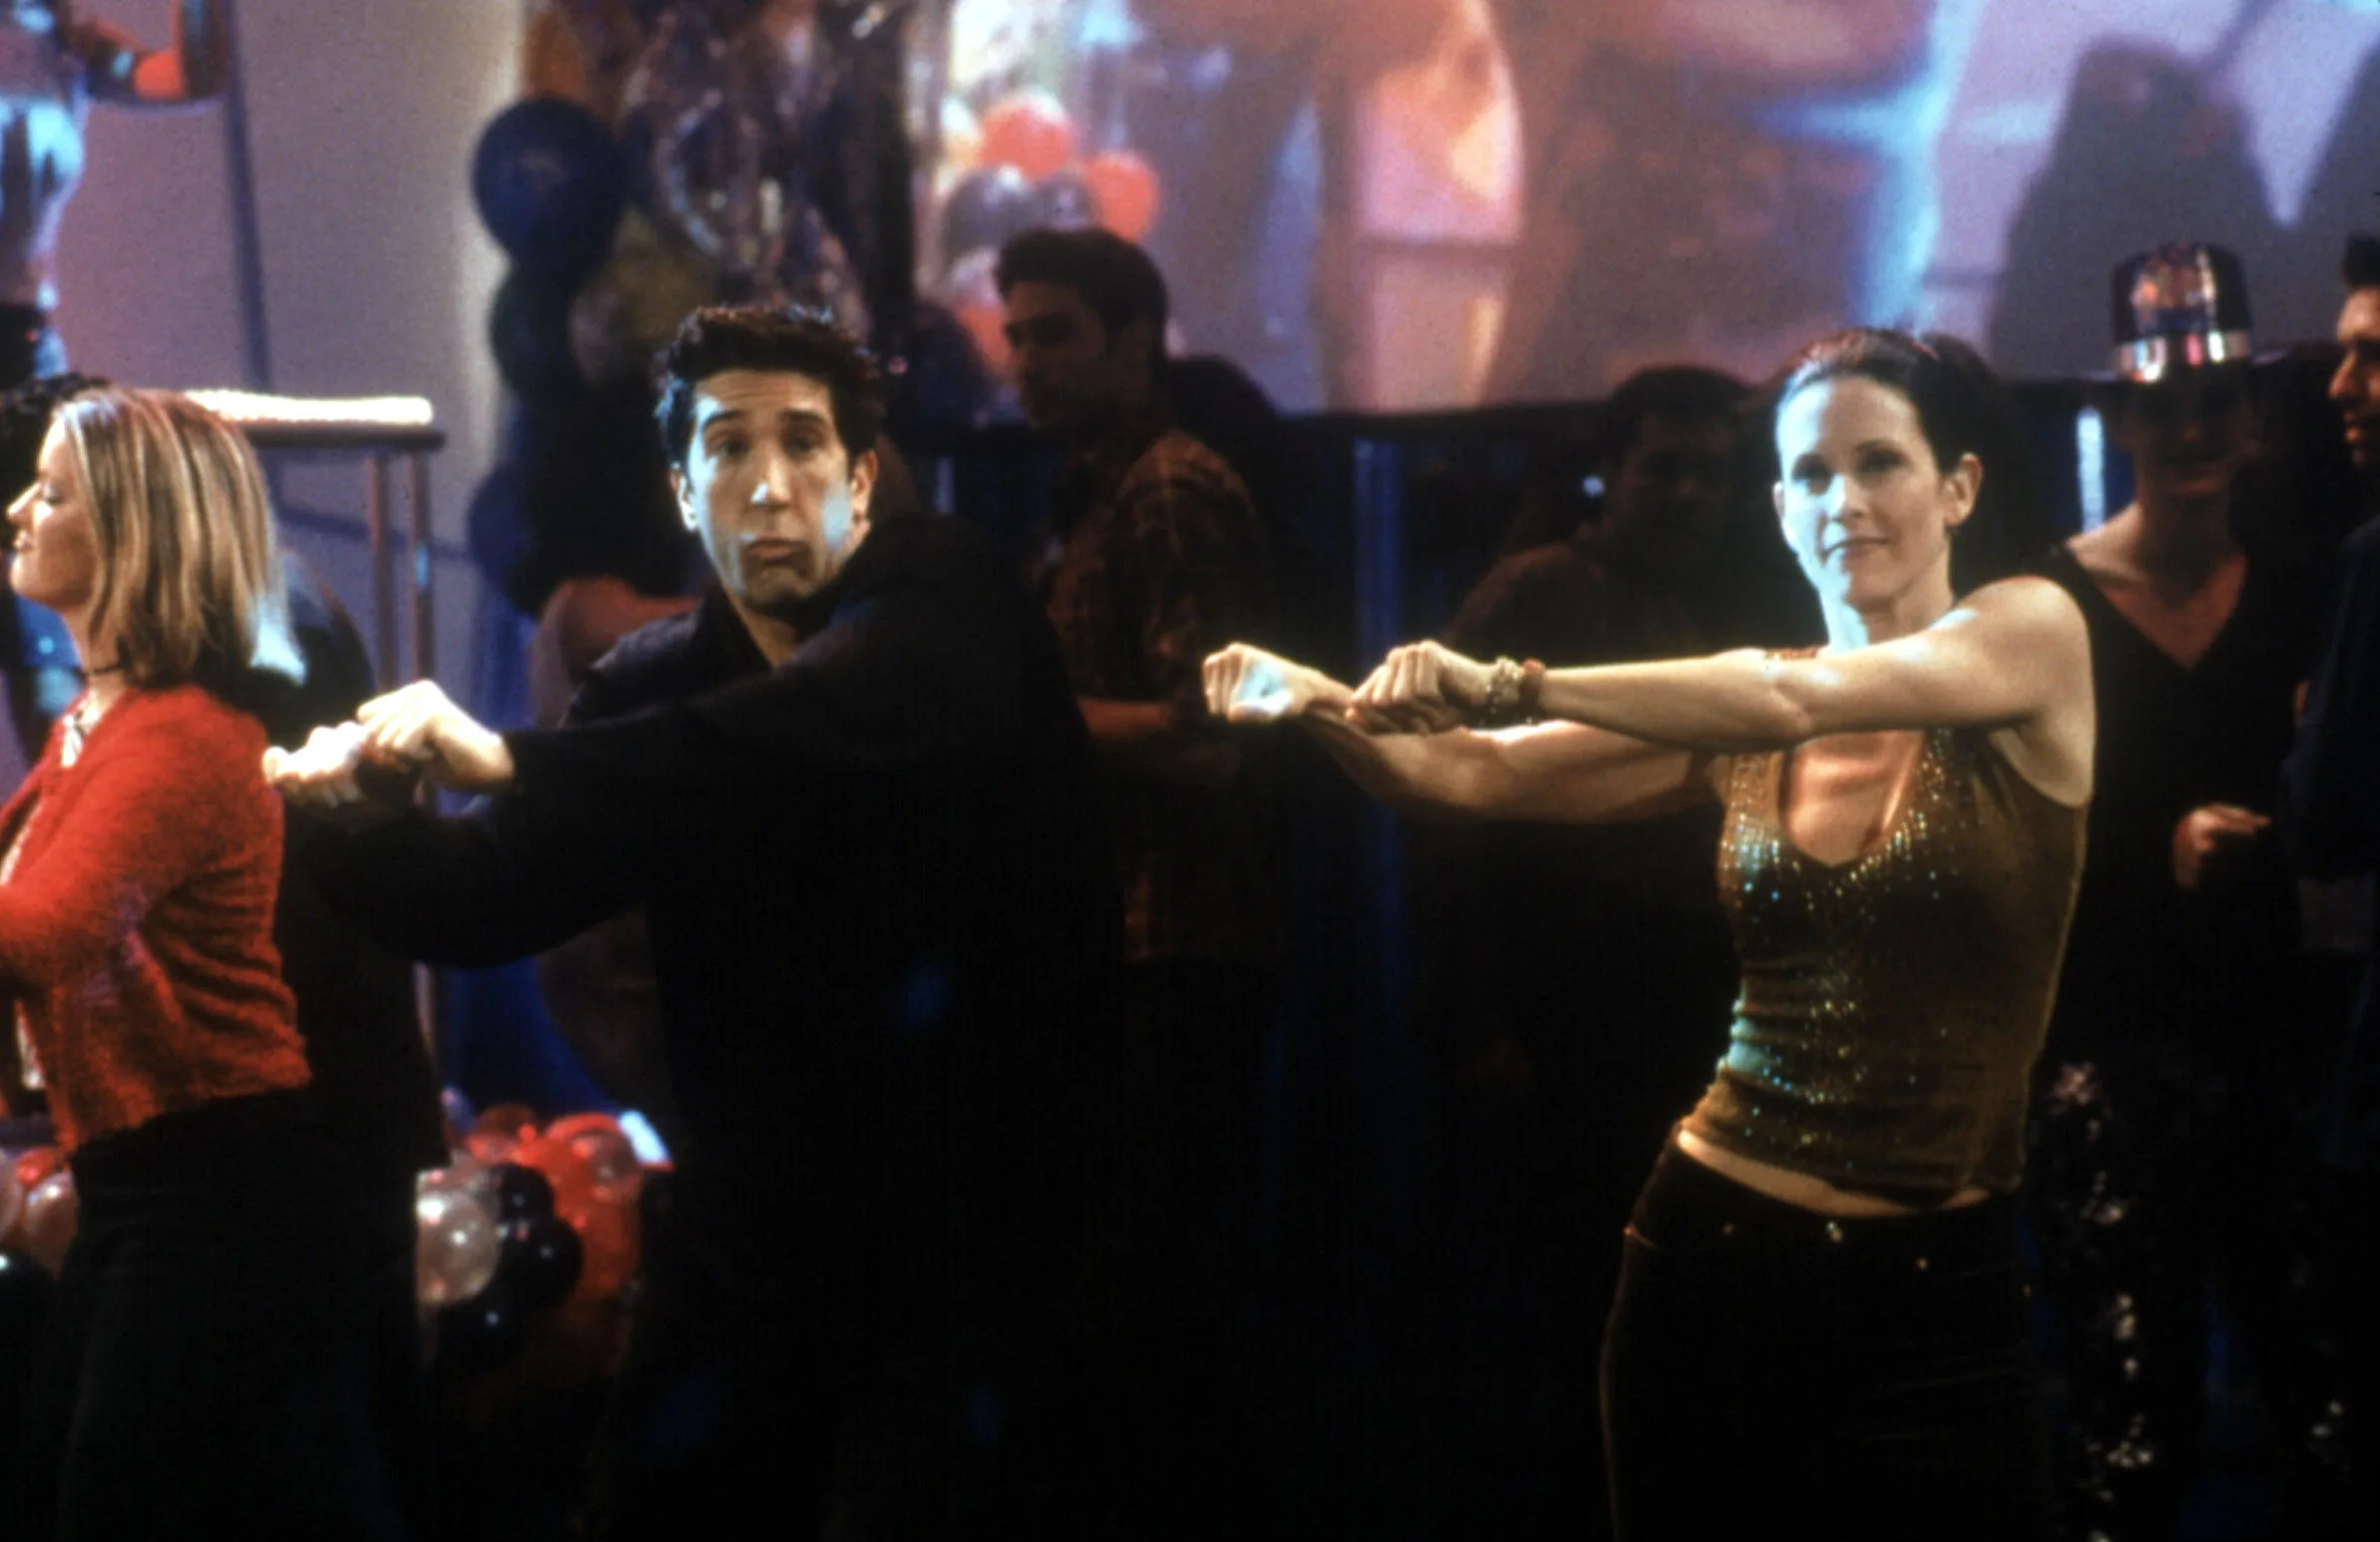 A still from the TV series Friends with Ross and Monica doing a dance